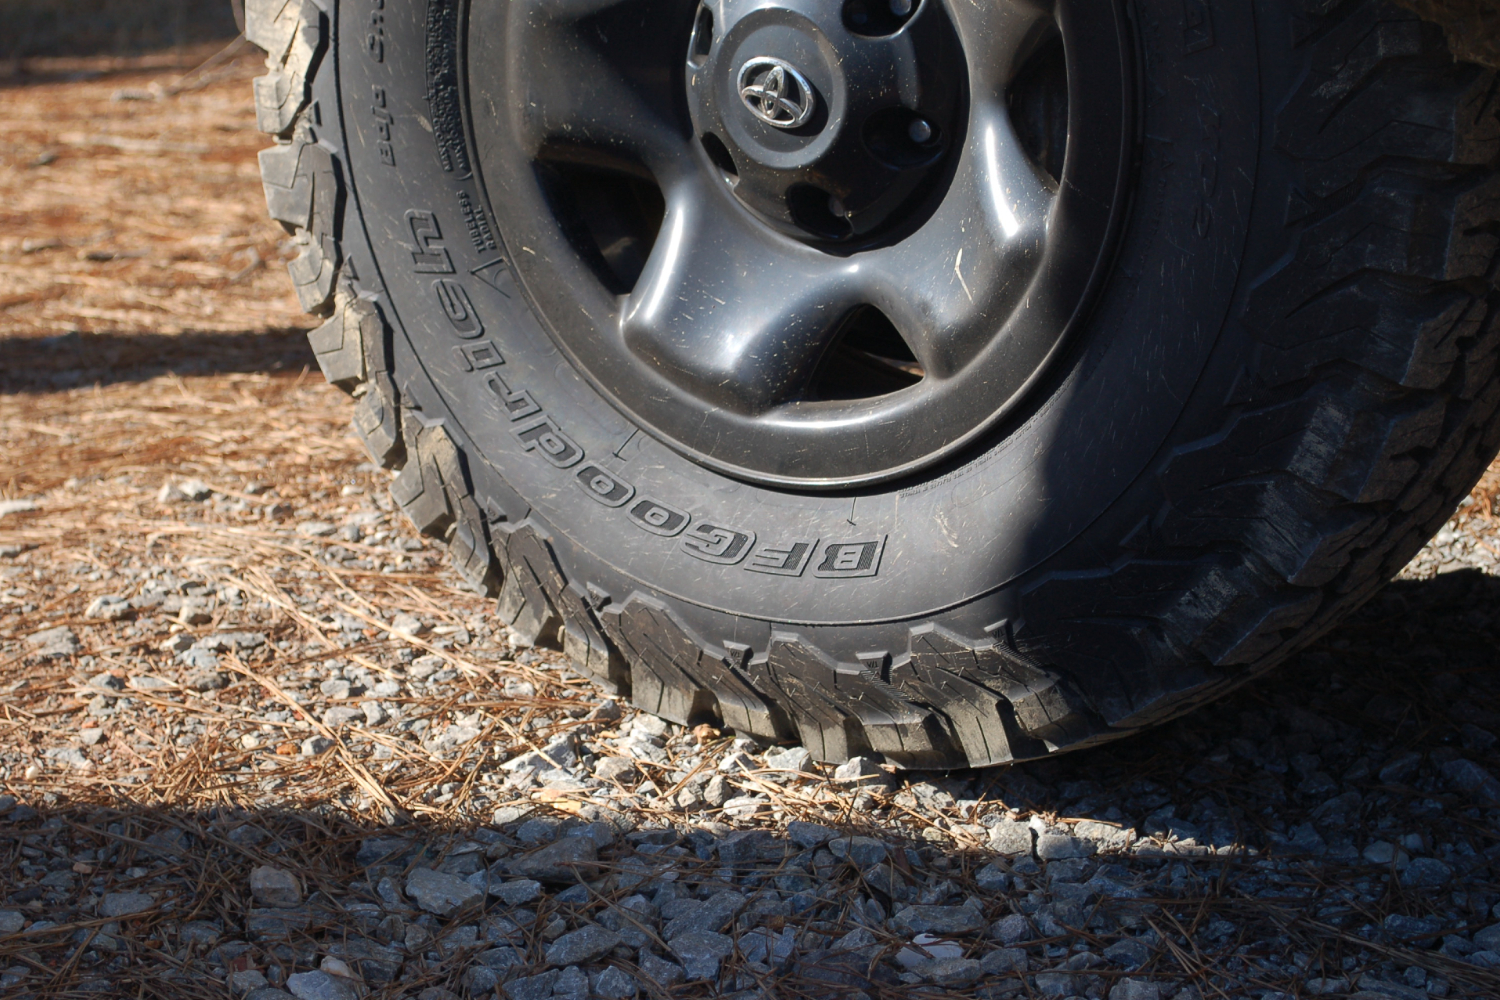 Best method to dressing large, aggressive tires. - Page 2